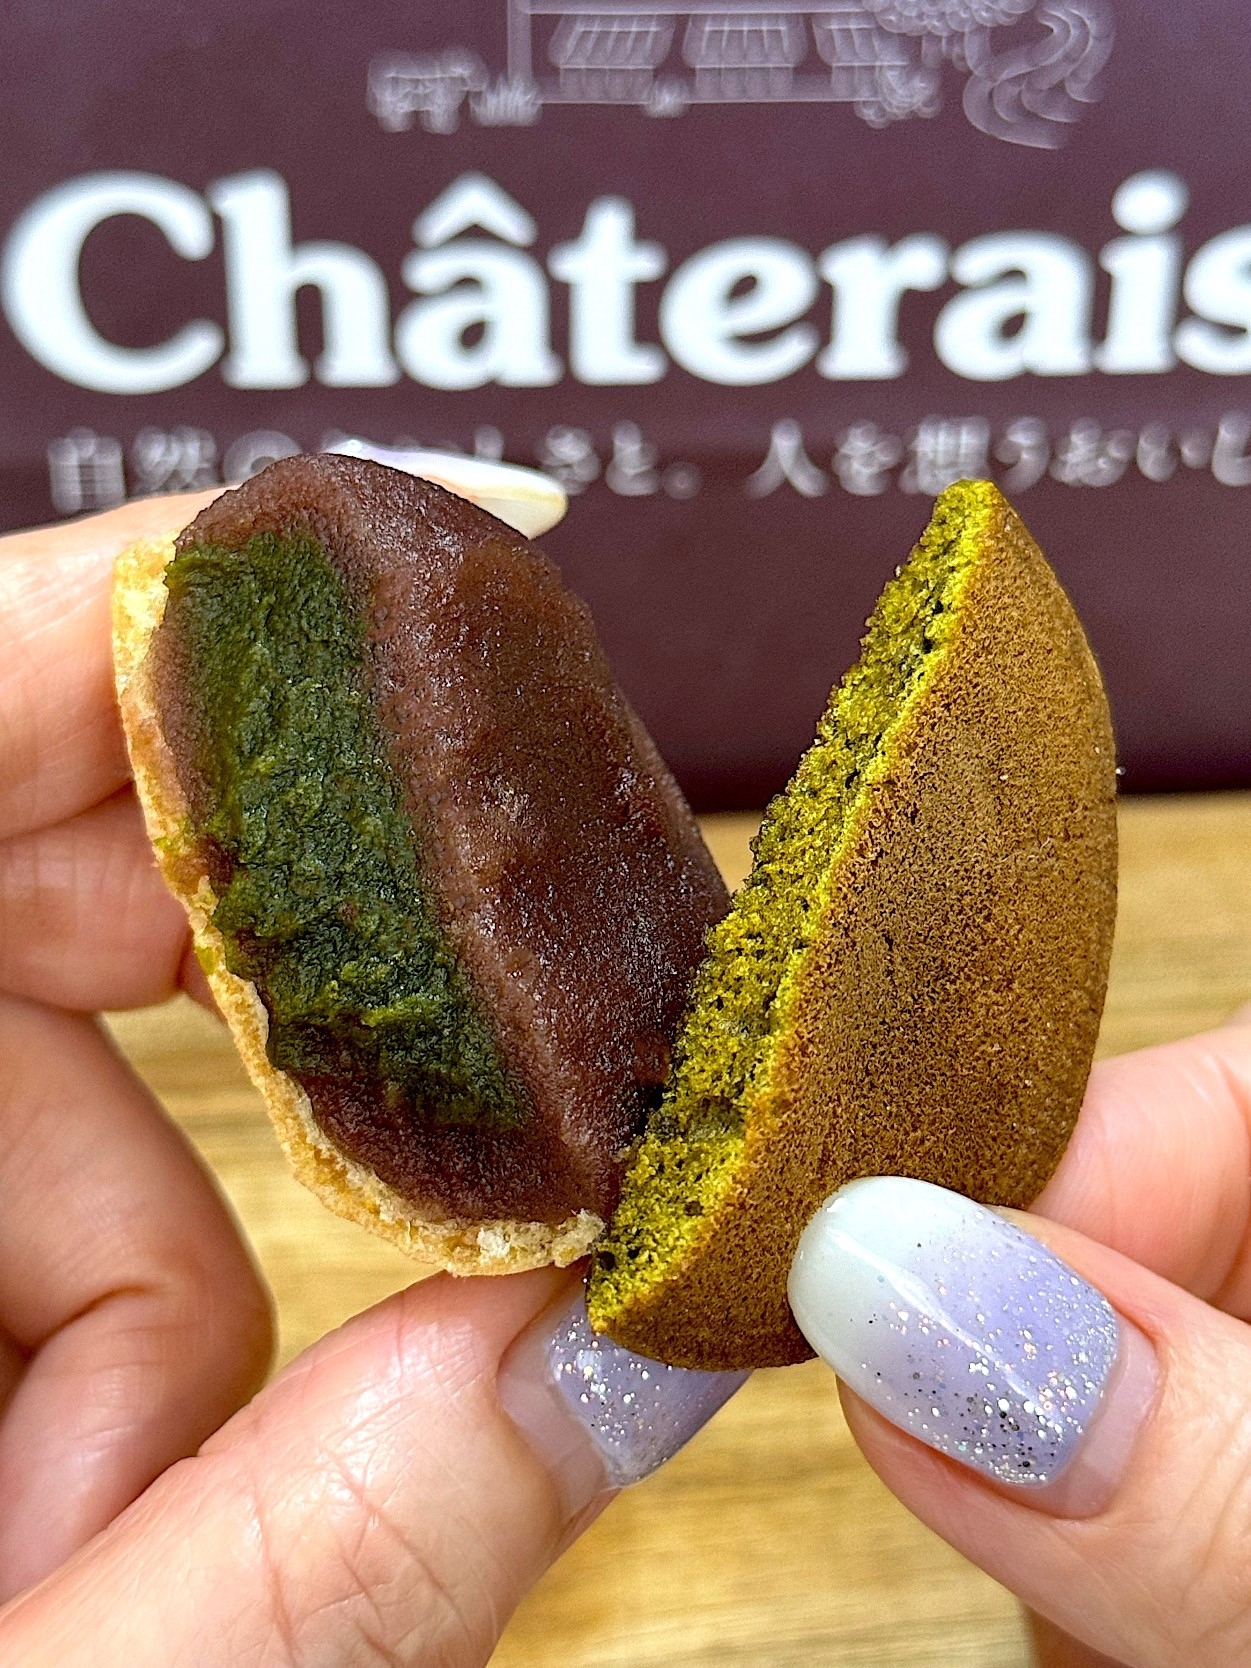 Person holding a matcha-flavored dorayaki, a Japanese sweet with green filling, in front of a Châteraisé sign